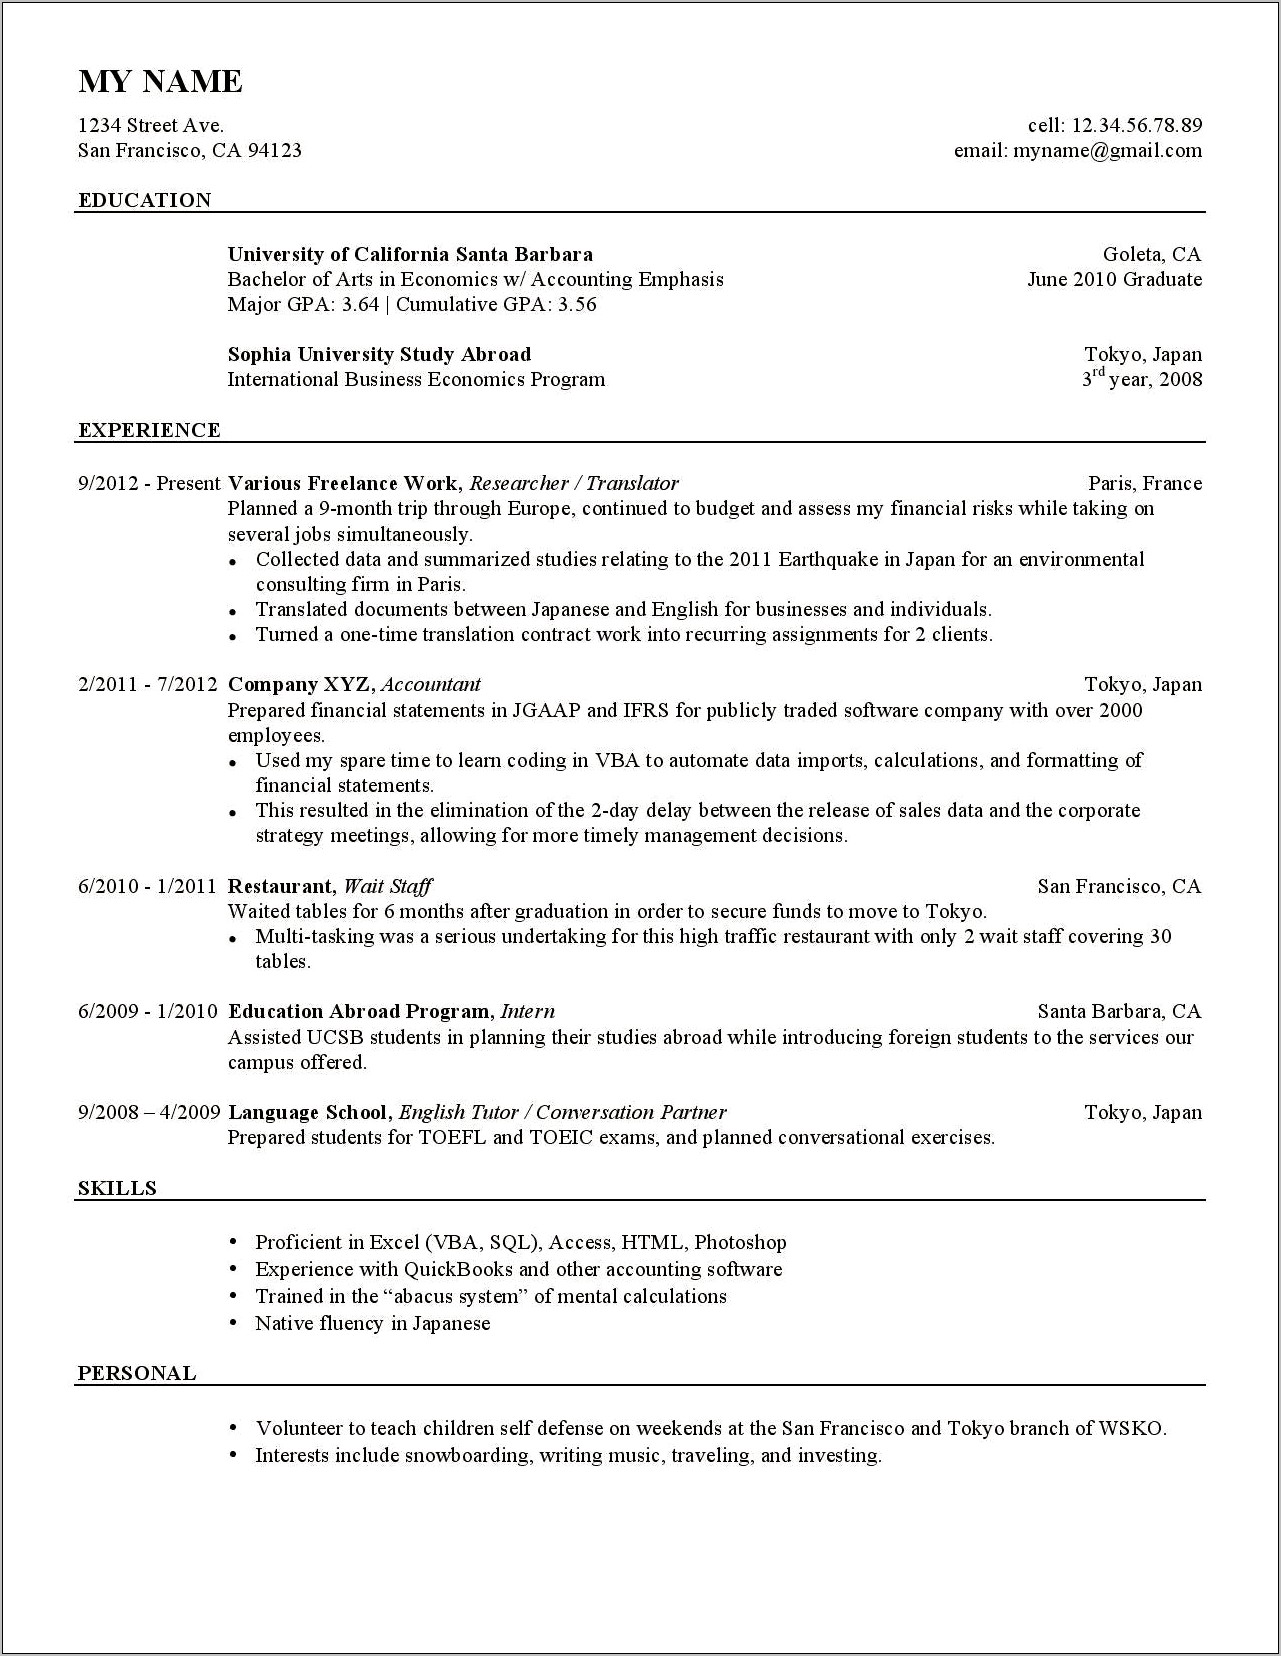 Resume List Countries I've Worked With